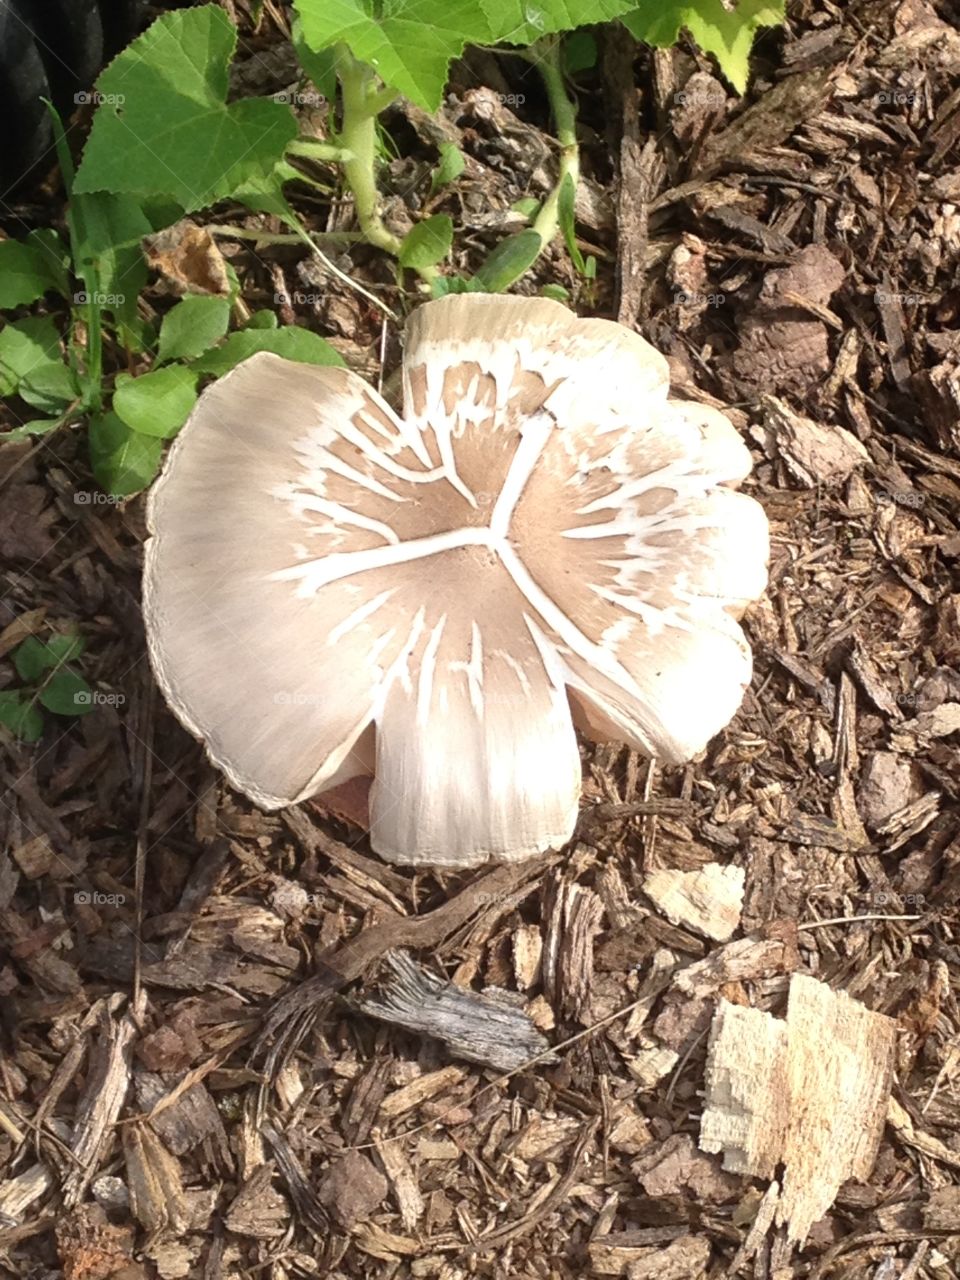 Mushroom. This is a mushroom that popped up on the ground up stump of our Ash tree that we had to take down due to ash borer 